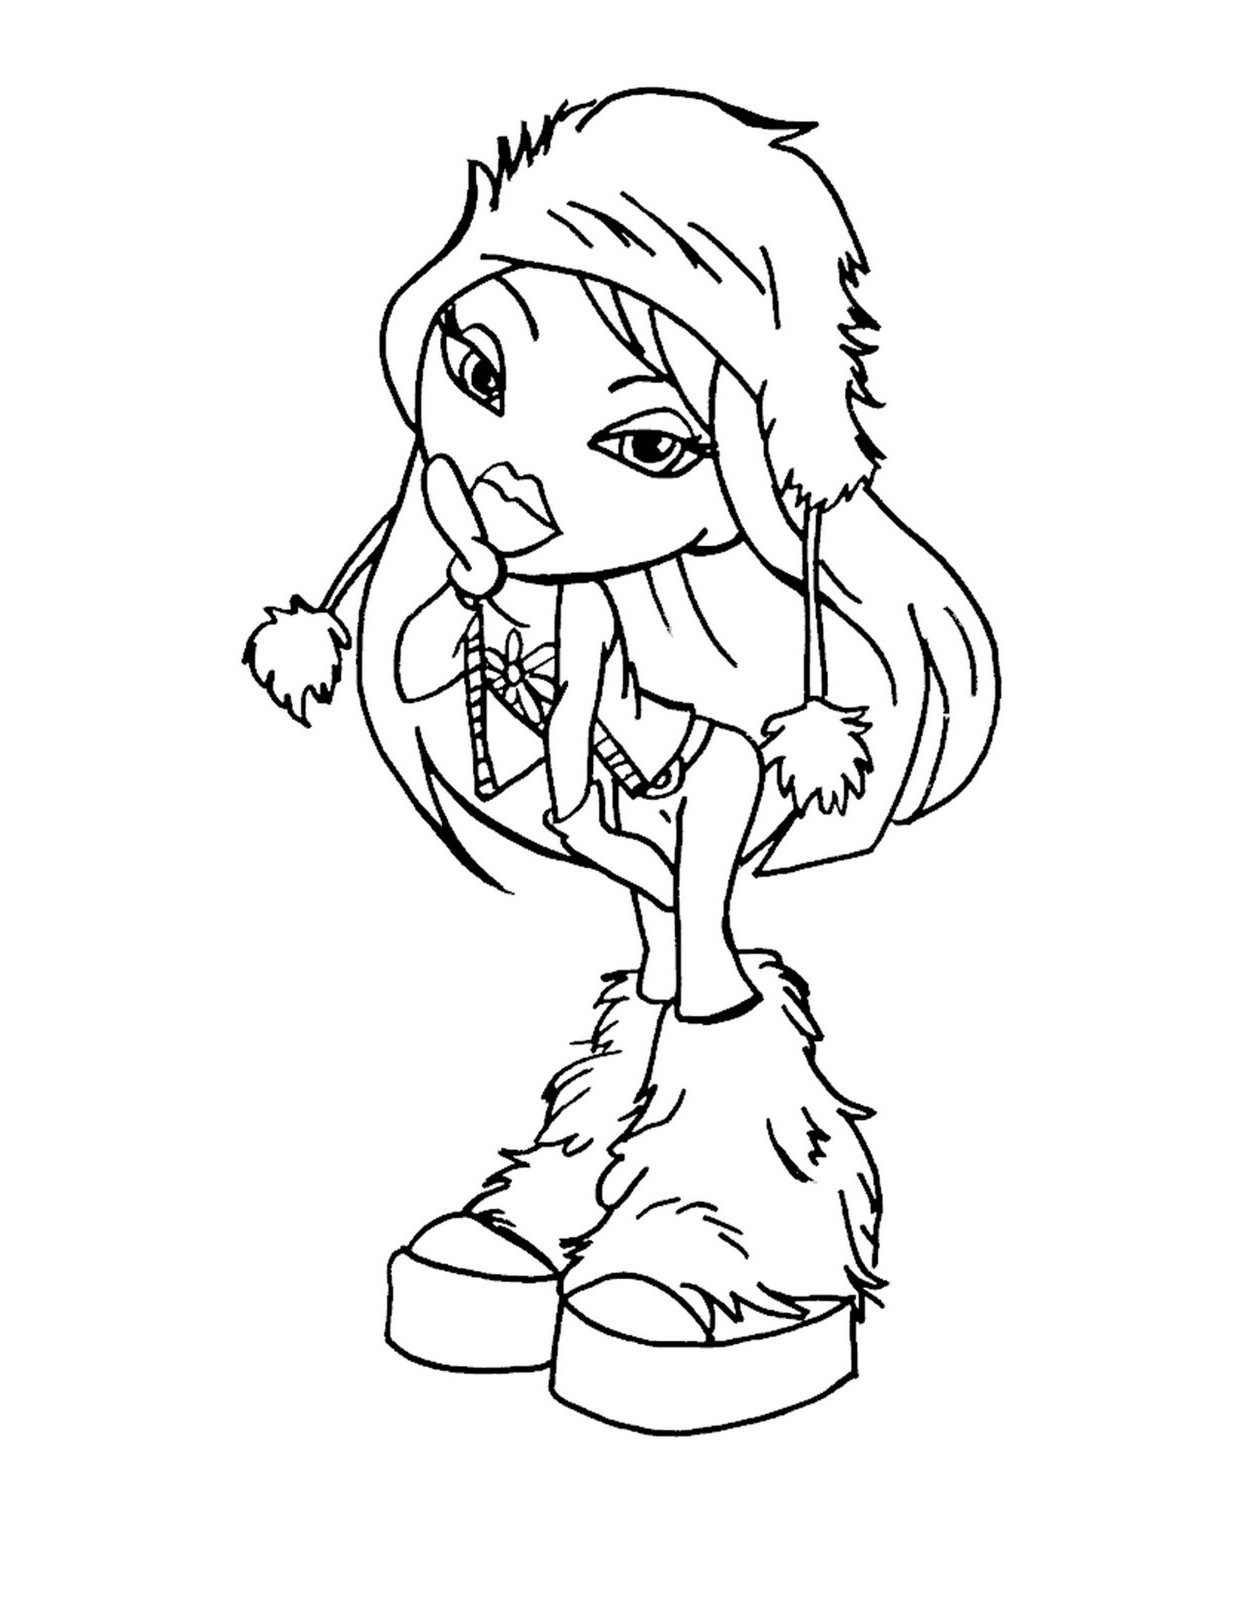 Bratz barbie coloring pages download and print for free